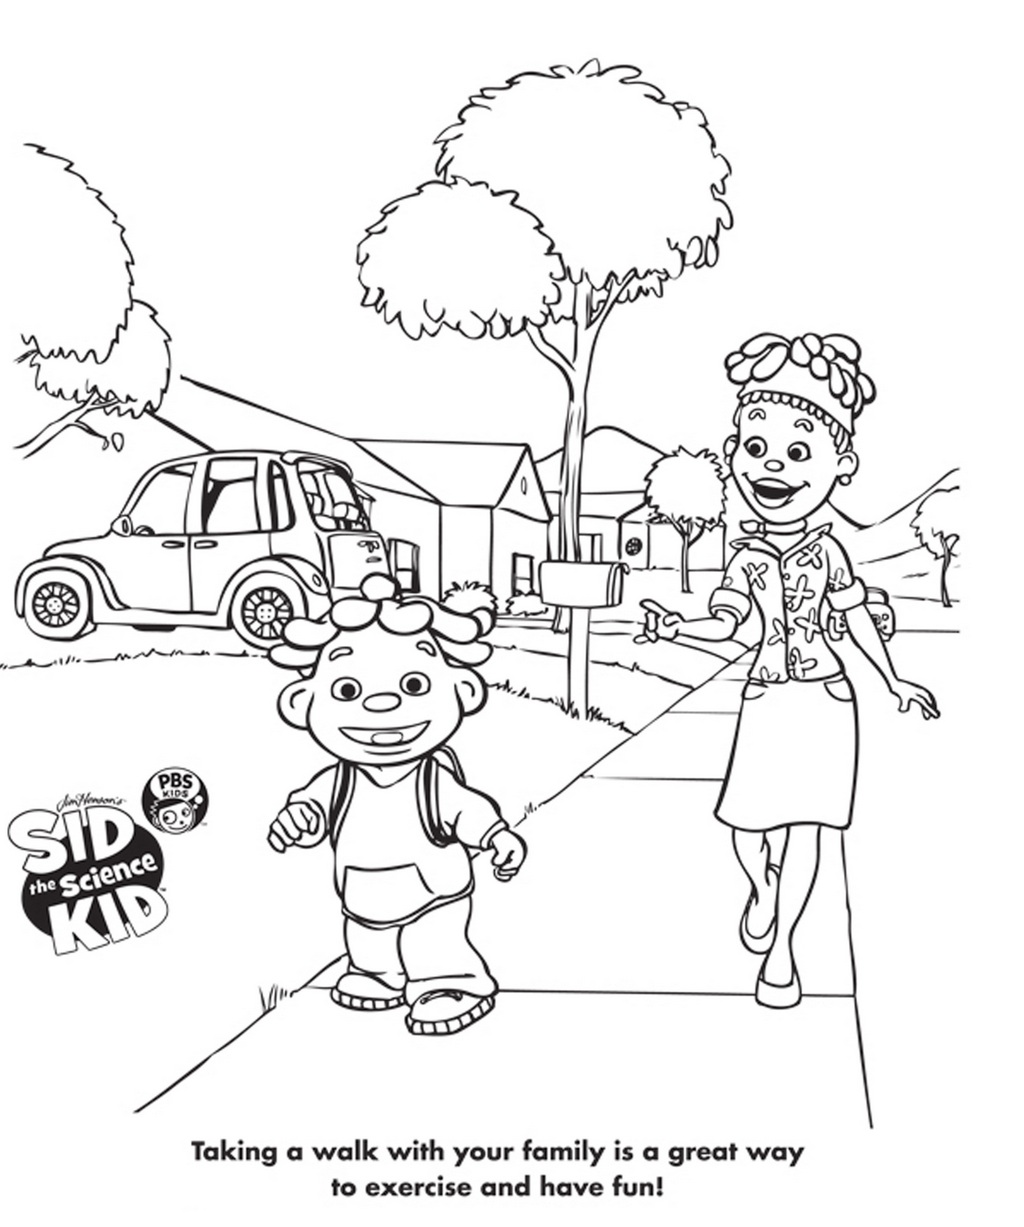 sid the science kid talking with family coloring sheet